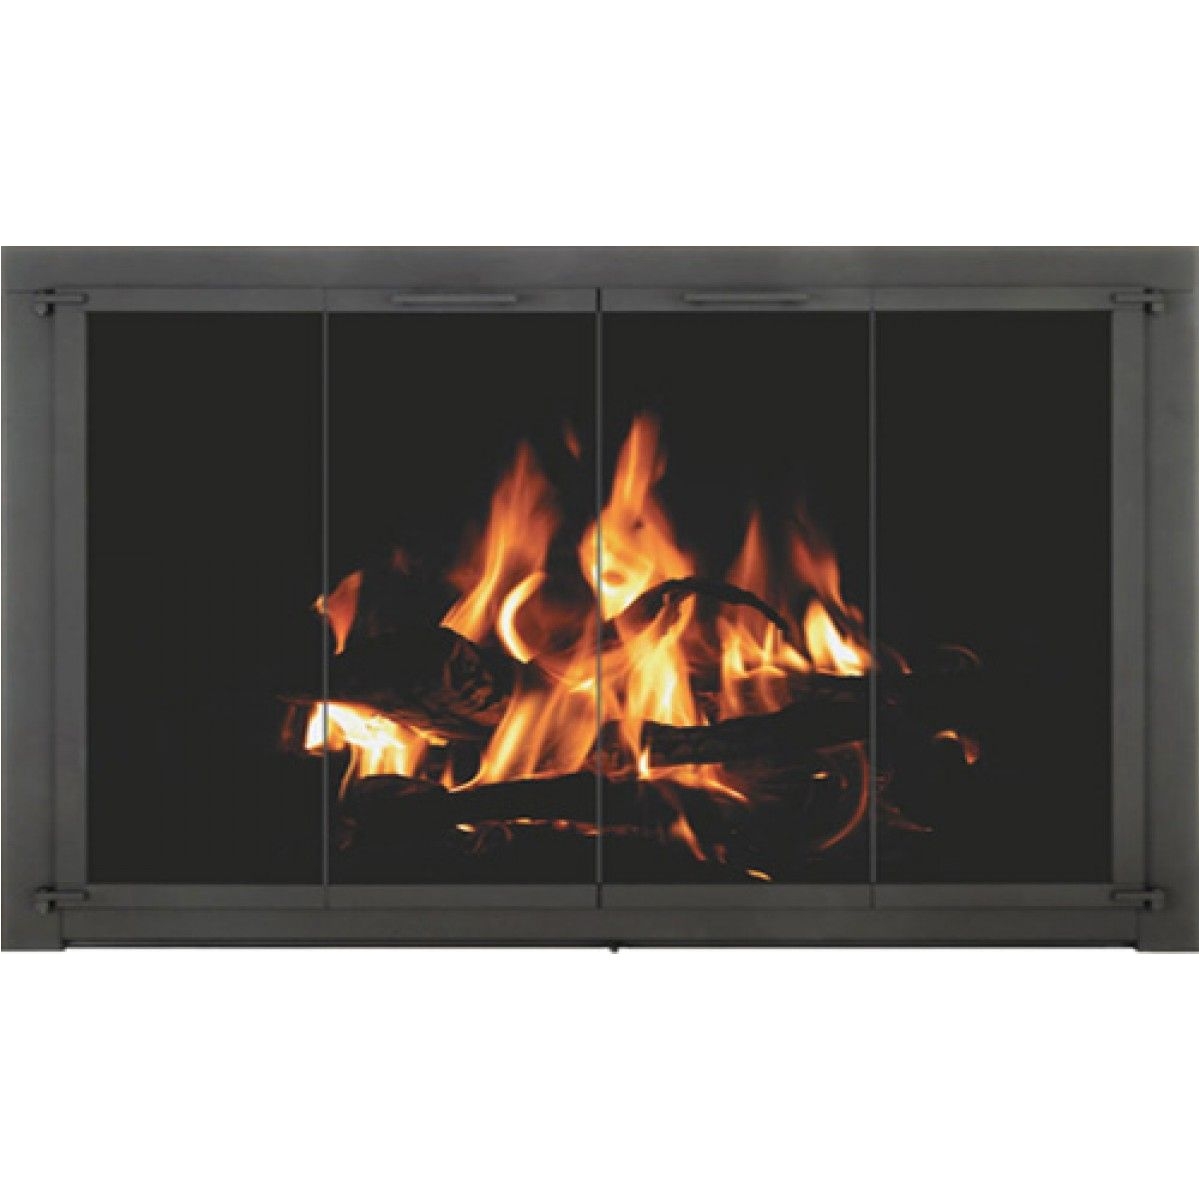 temtex fireplace glass doors the crestone for temco fireplaces temco fireplace doors of temtex fireplace glass doors